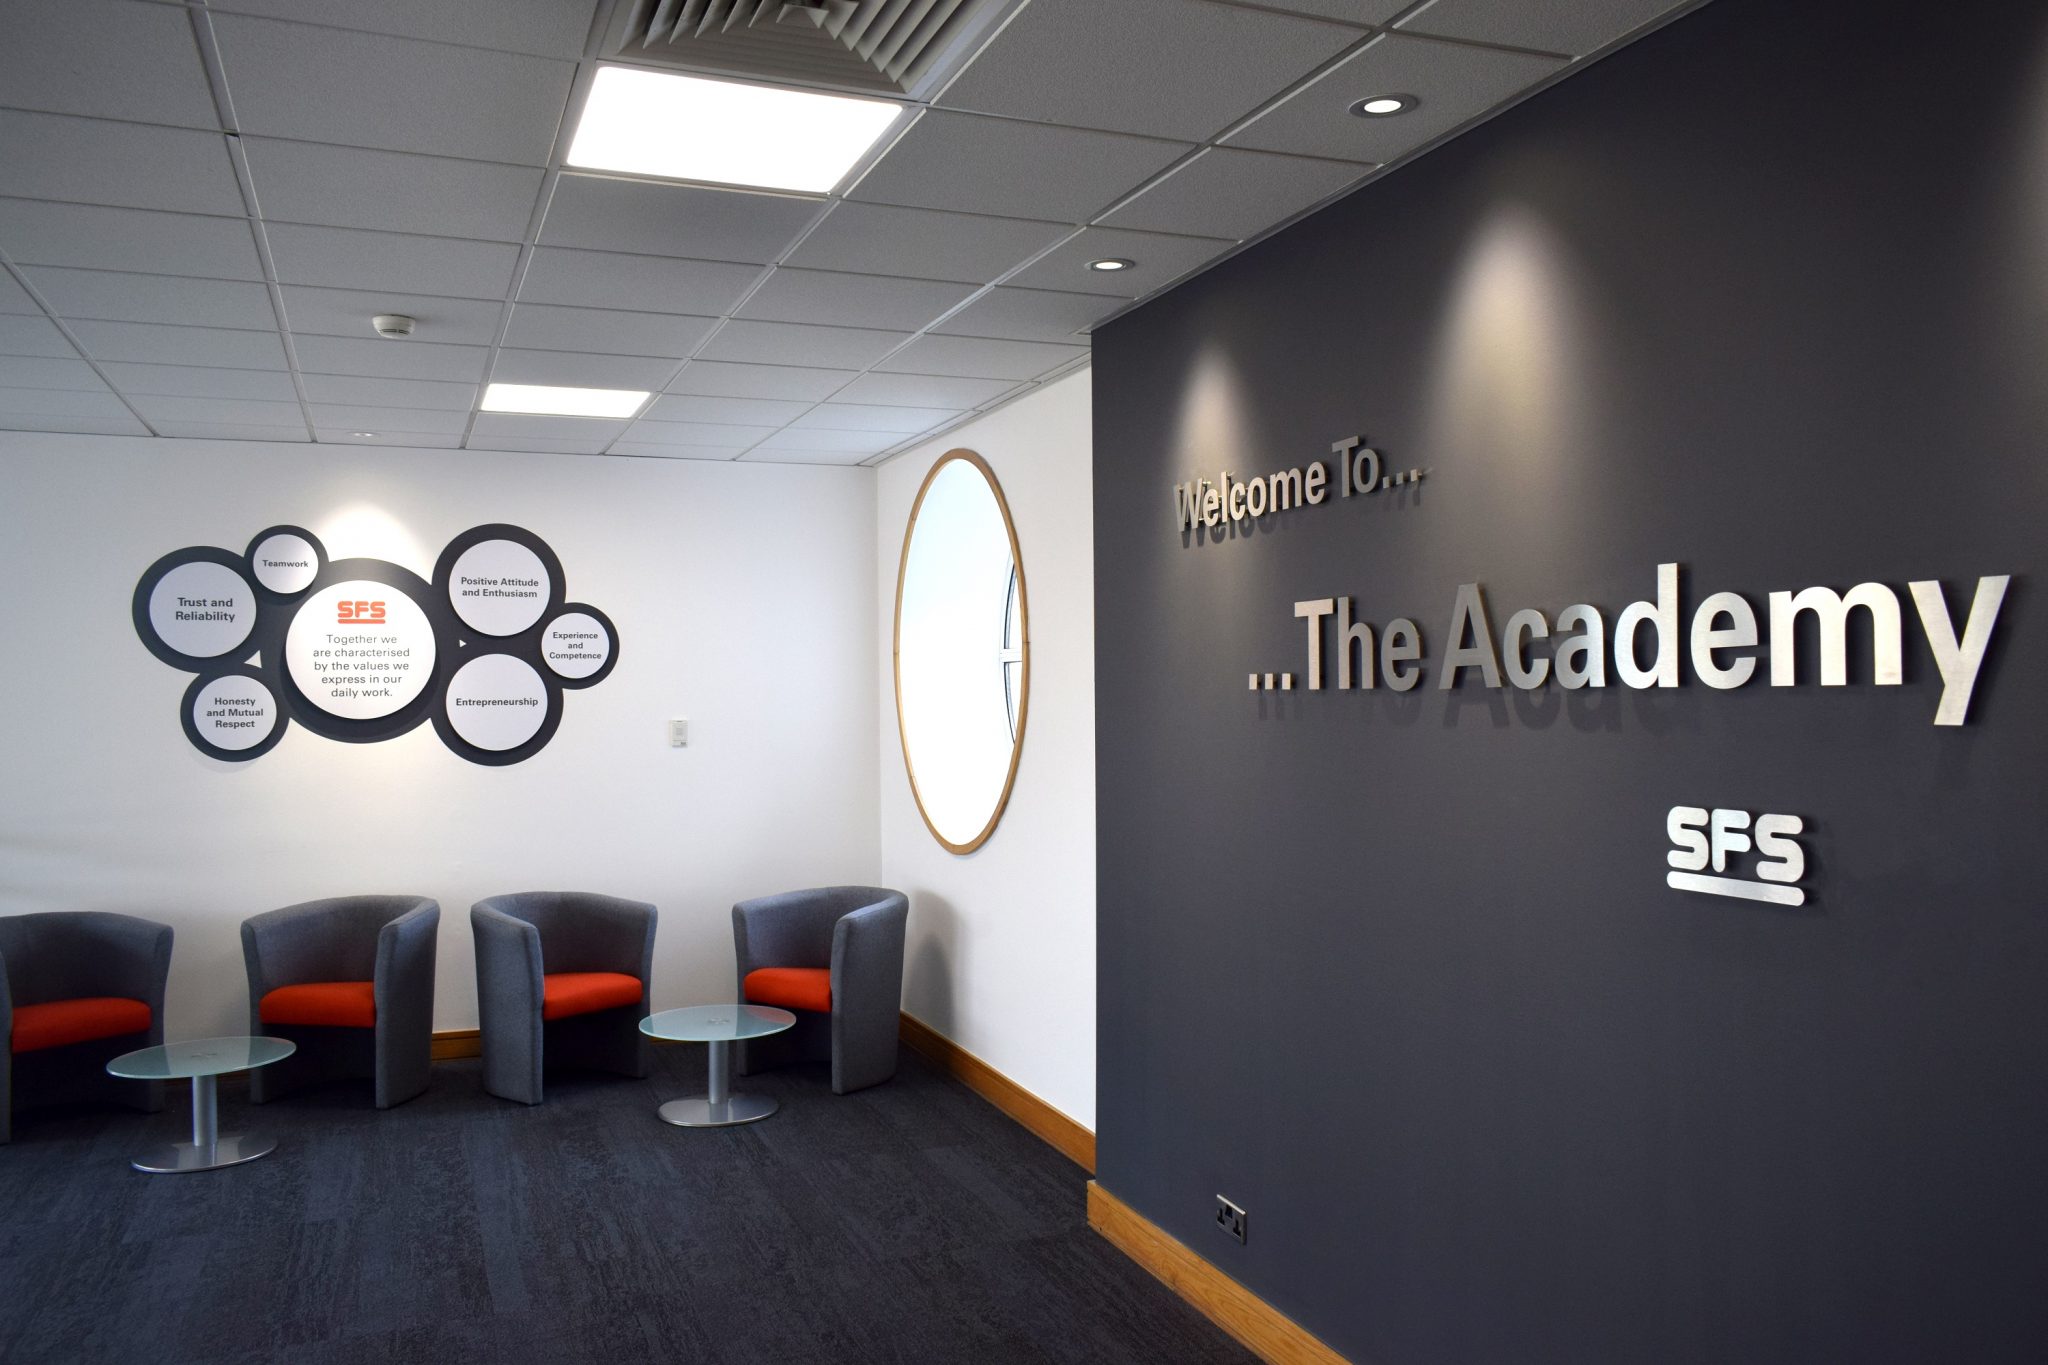 SFS to launch new Academy